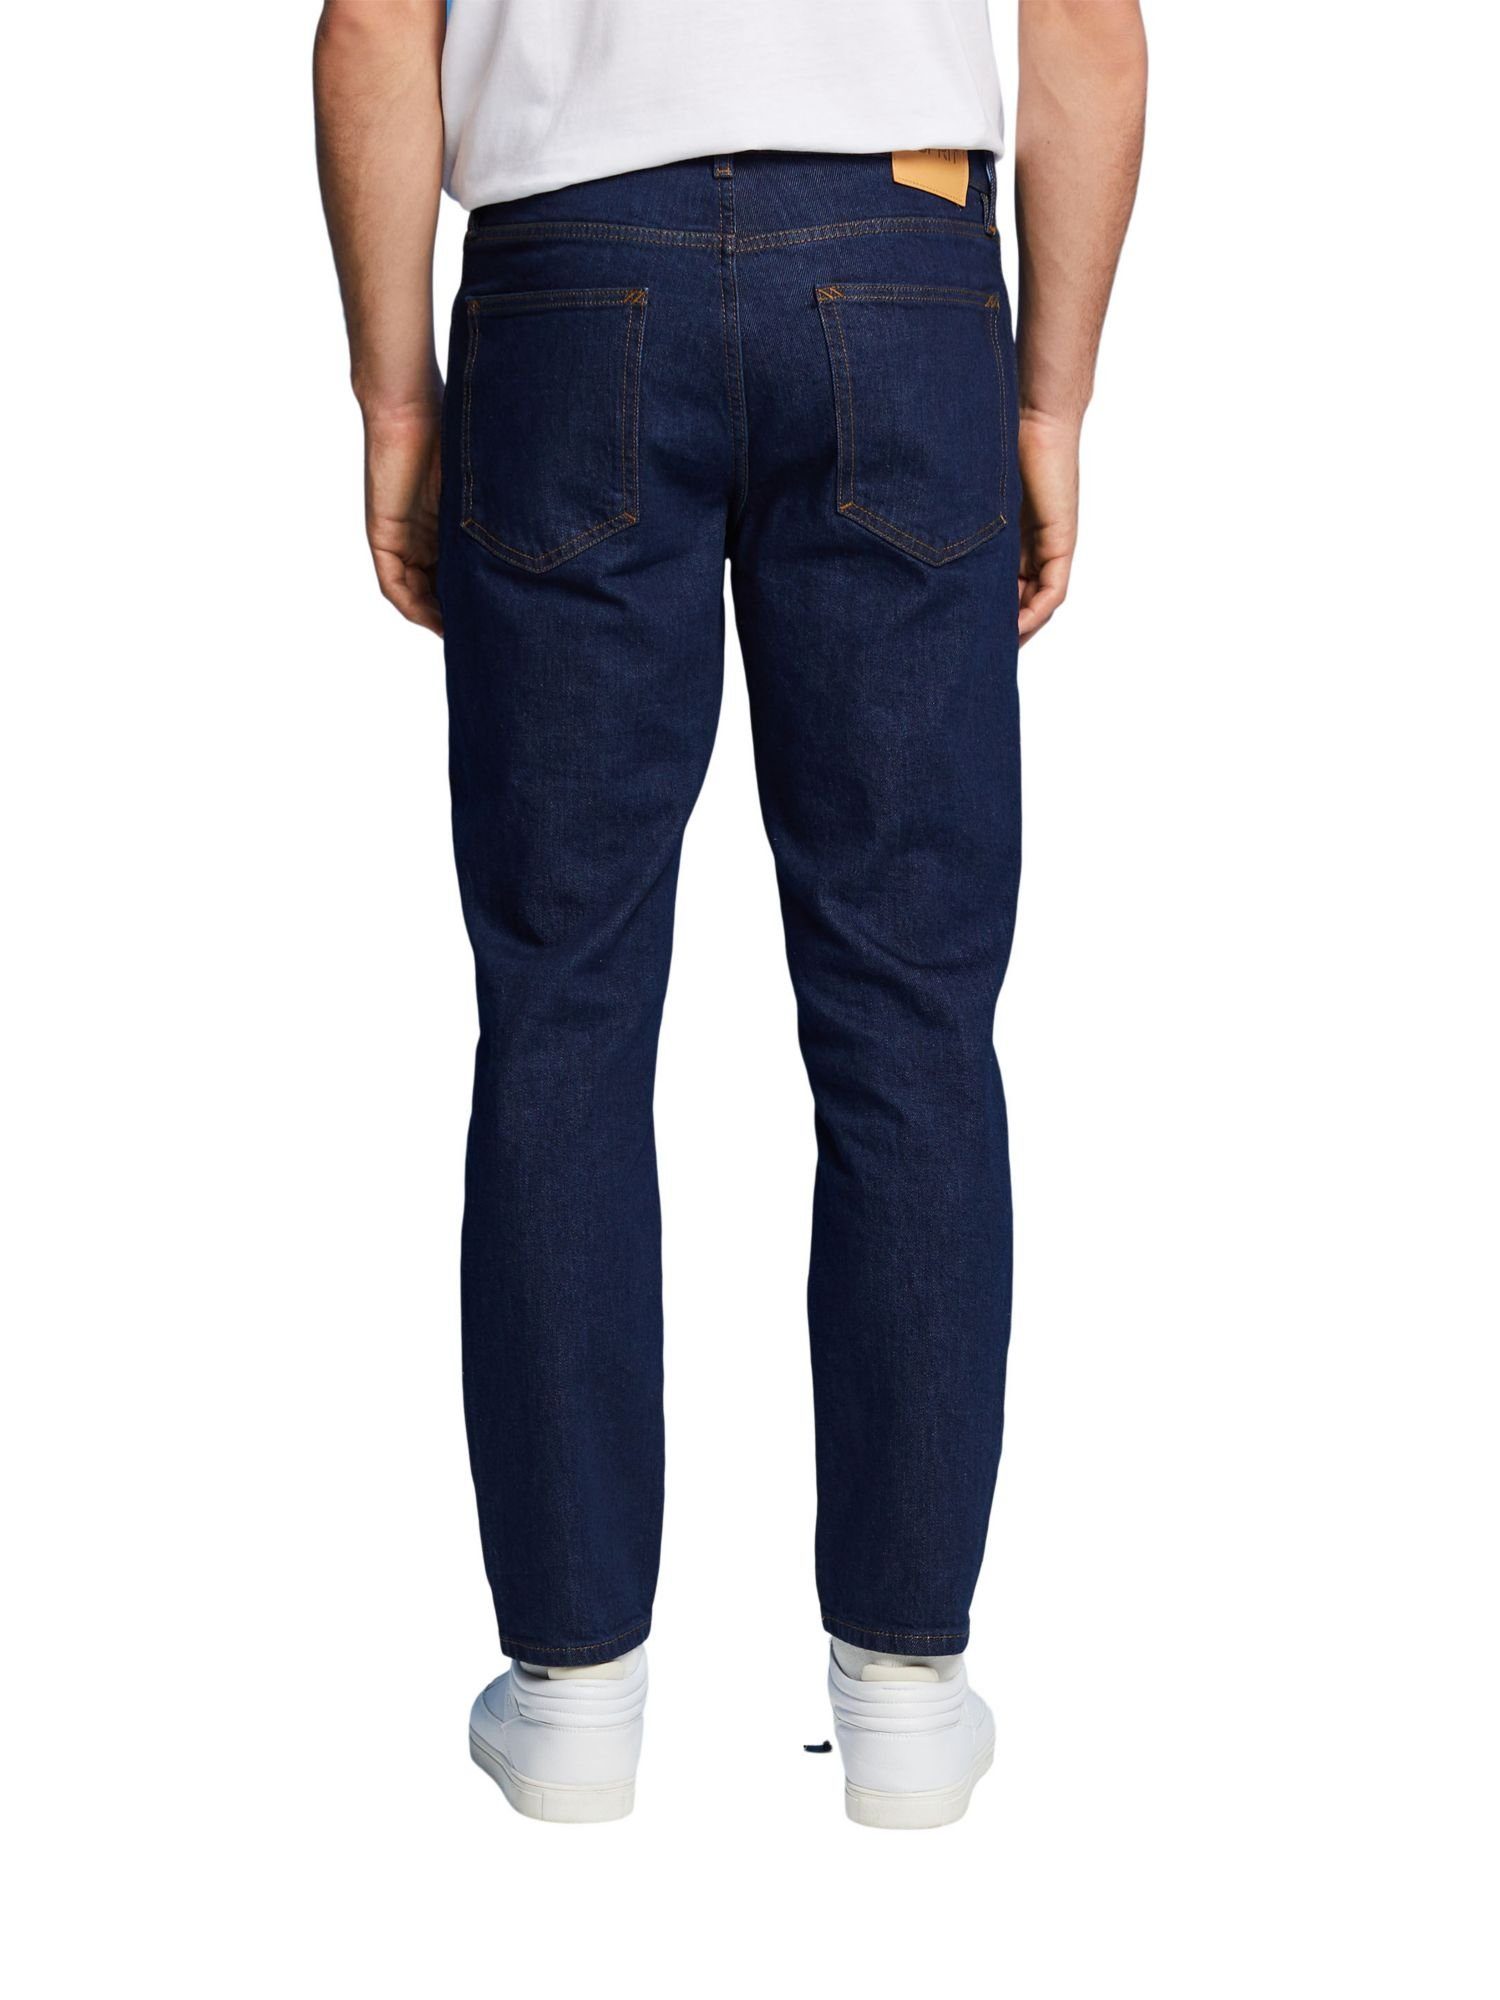 RINSE Esprit Slim-fit-Jeans Relaxed-Fit-Jeans BLUE Collection